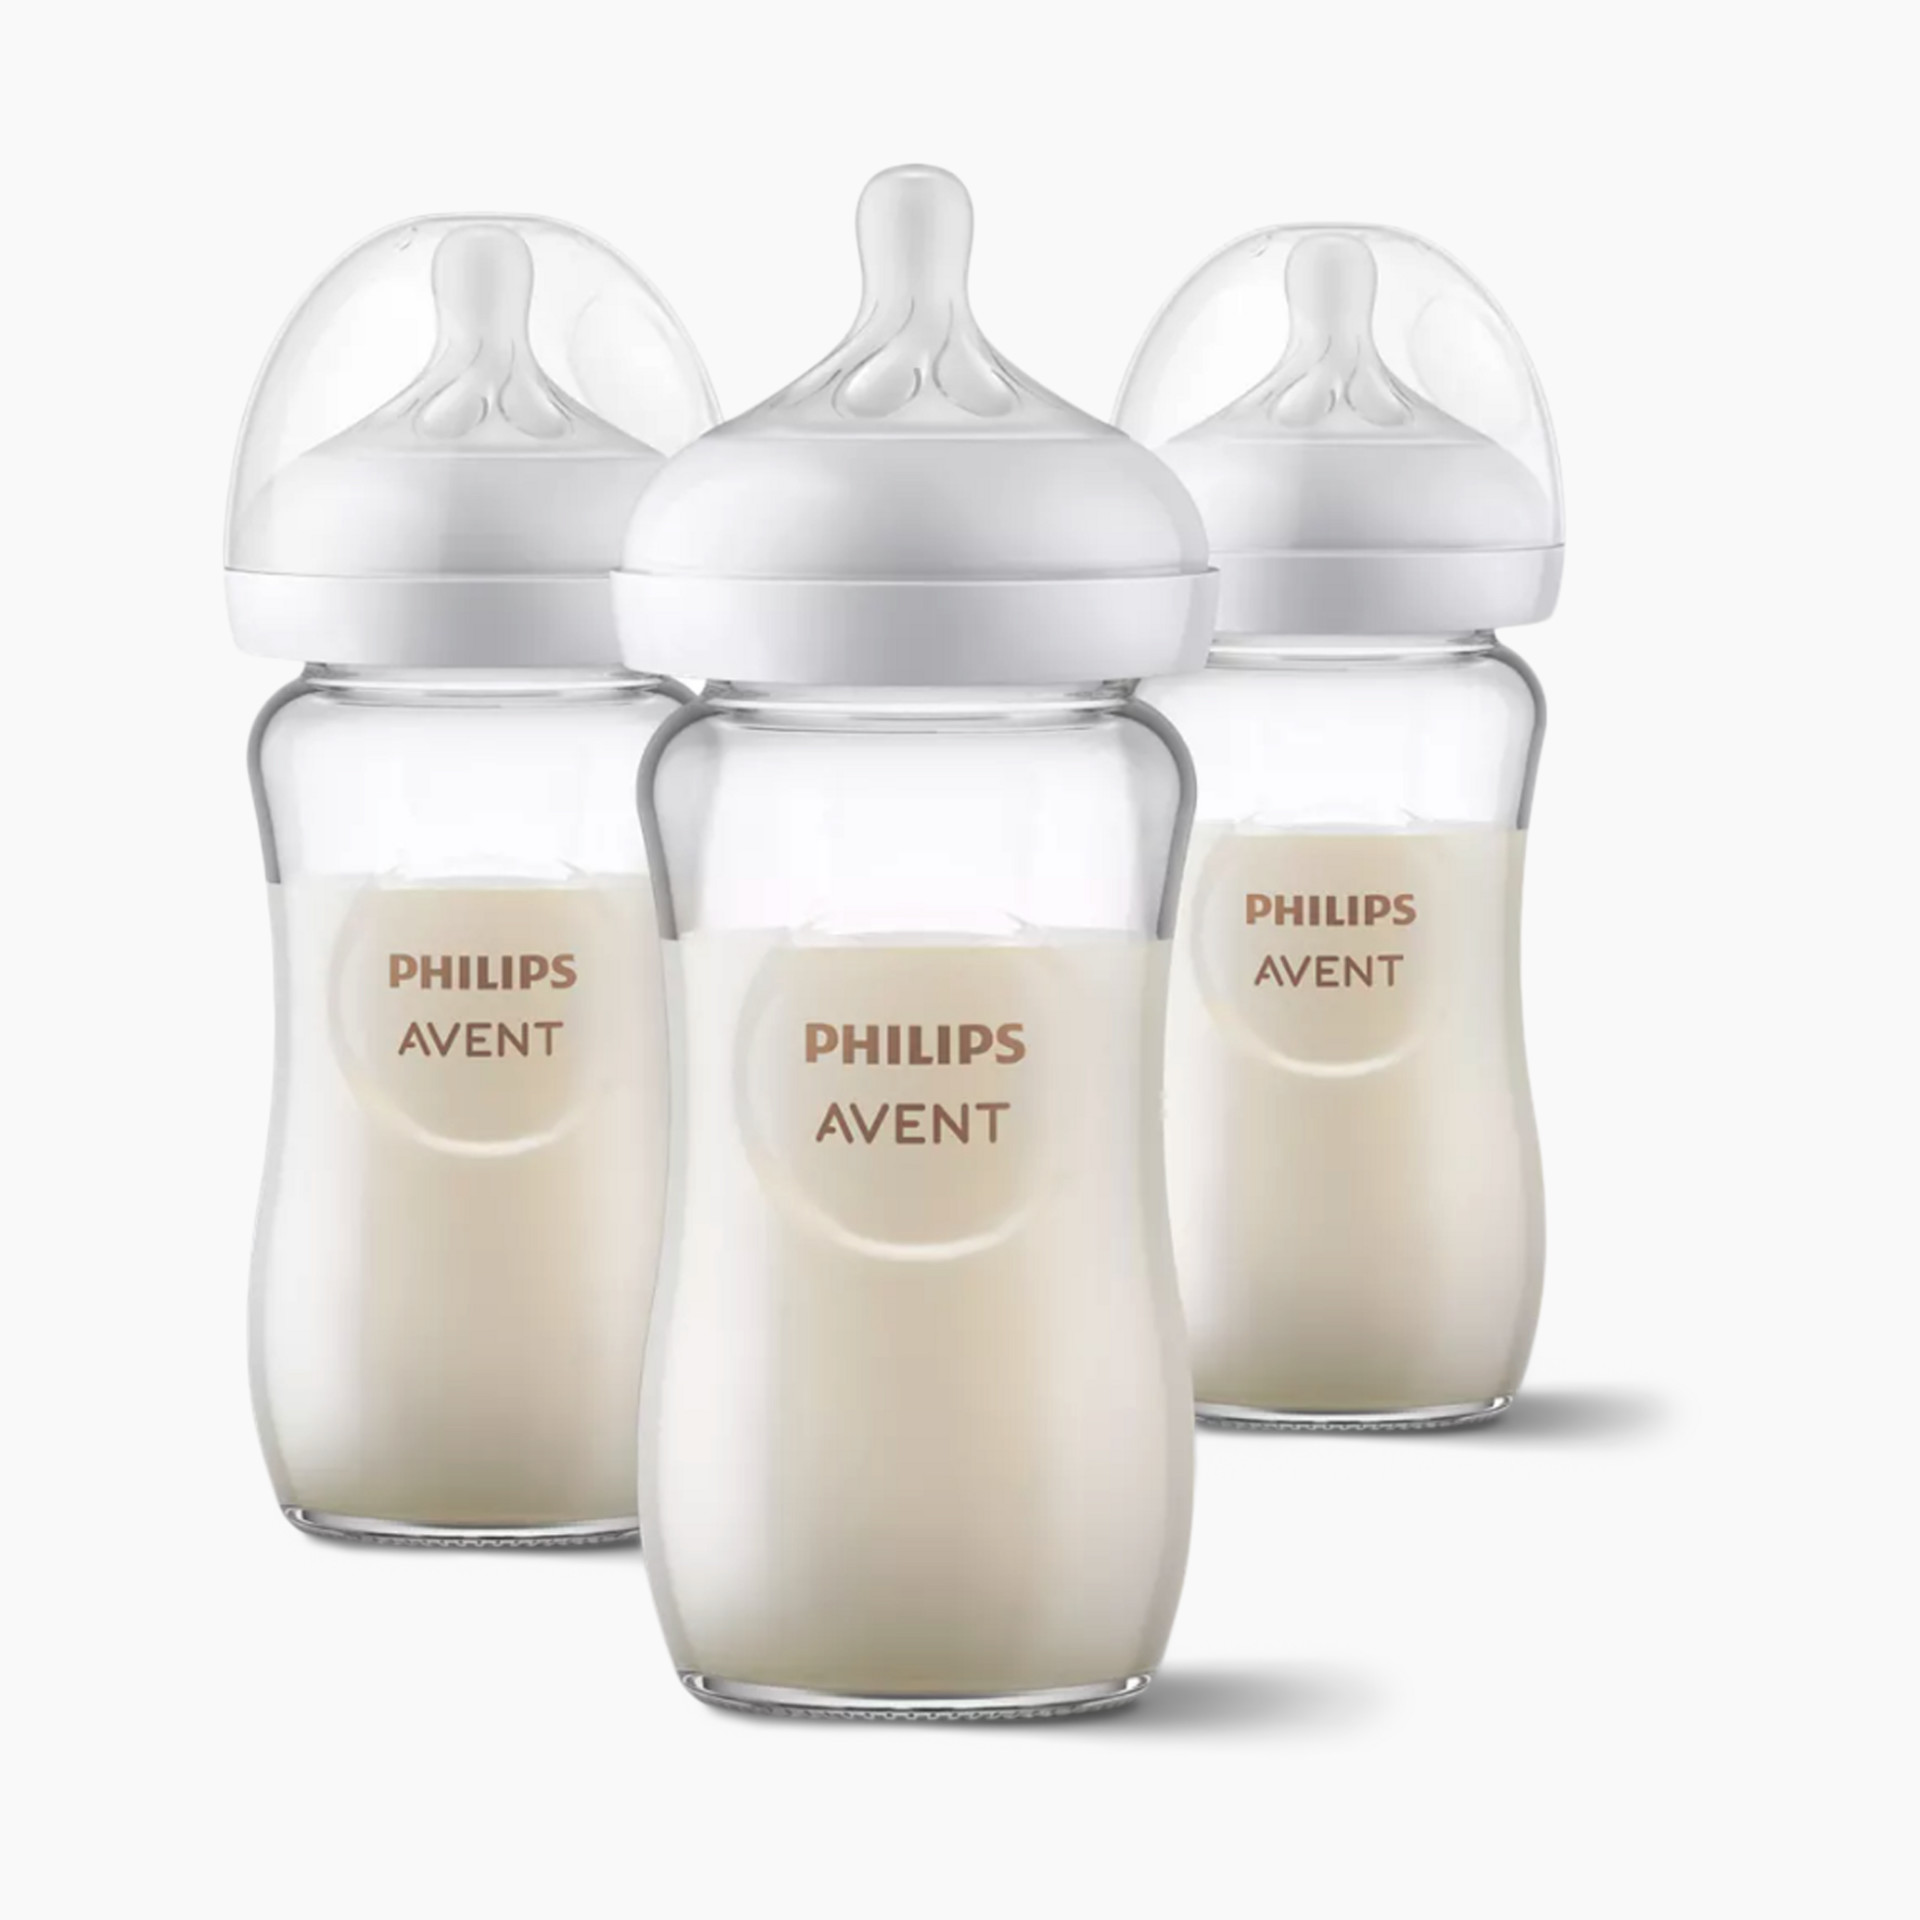 Best Bottles for Spectra Breast Pumps - The Glass Baby Bottle